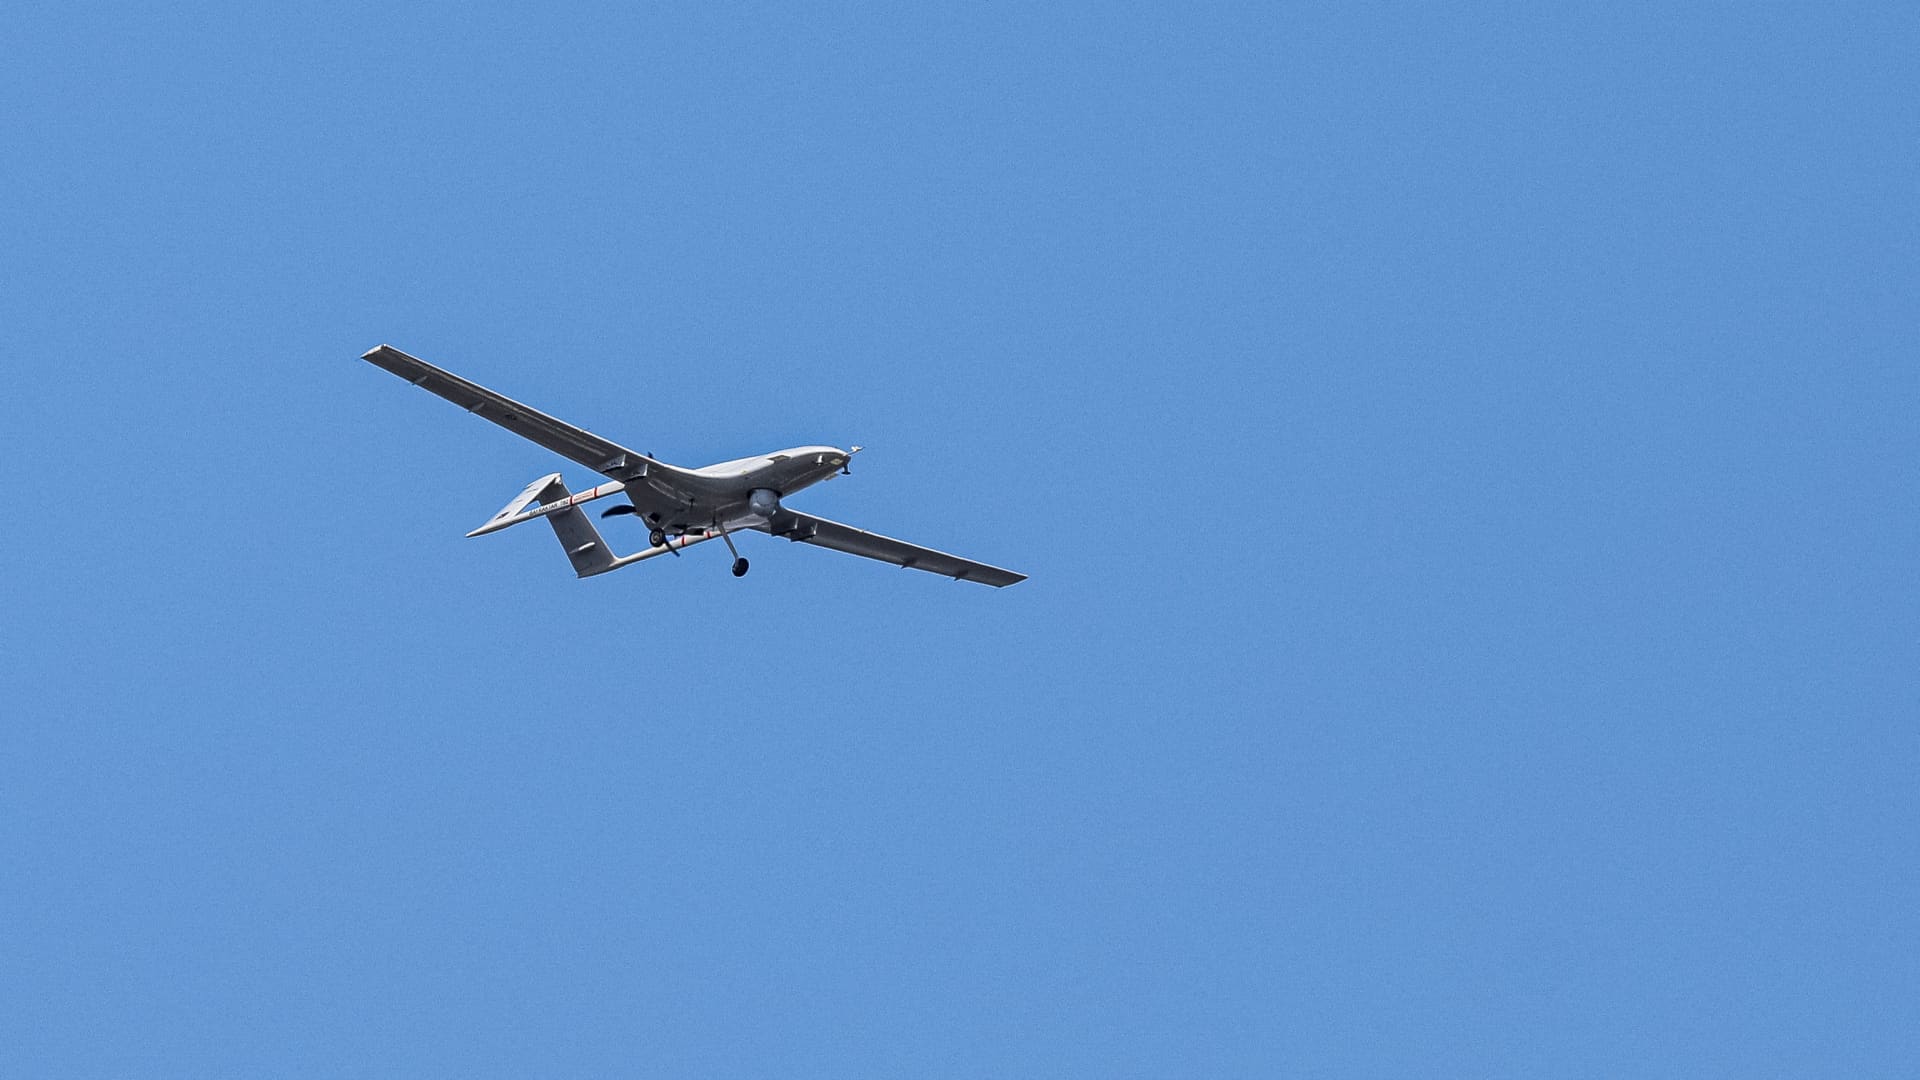 A Bayraktar TB2 unmanned combat aerial vehicle is seen during a demonstration flight at Teknofest aerospace and technology festival in Baku, Azerbaijan May 27, 2022. 